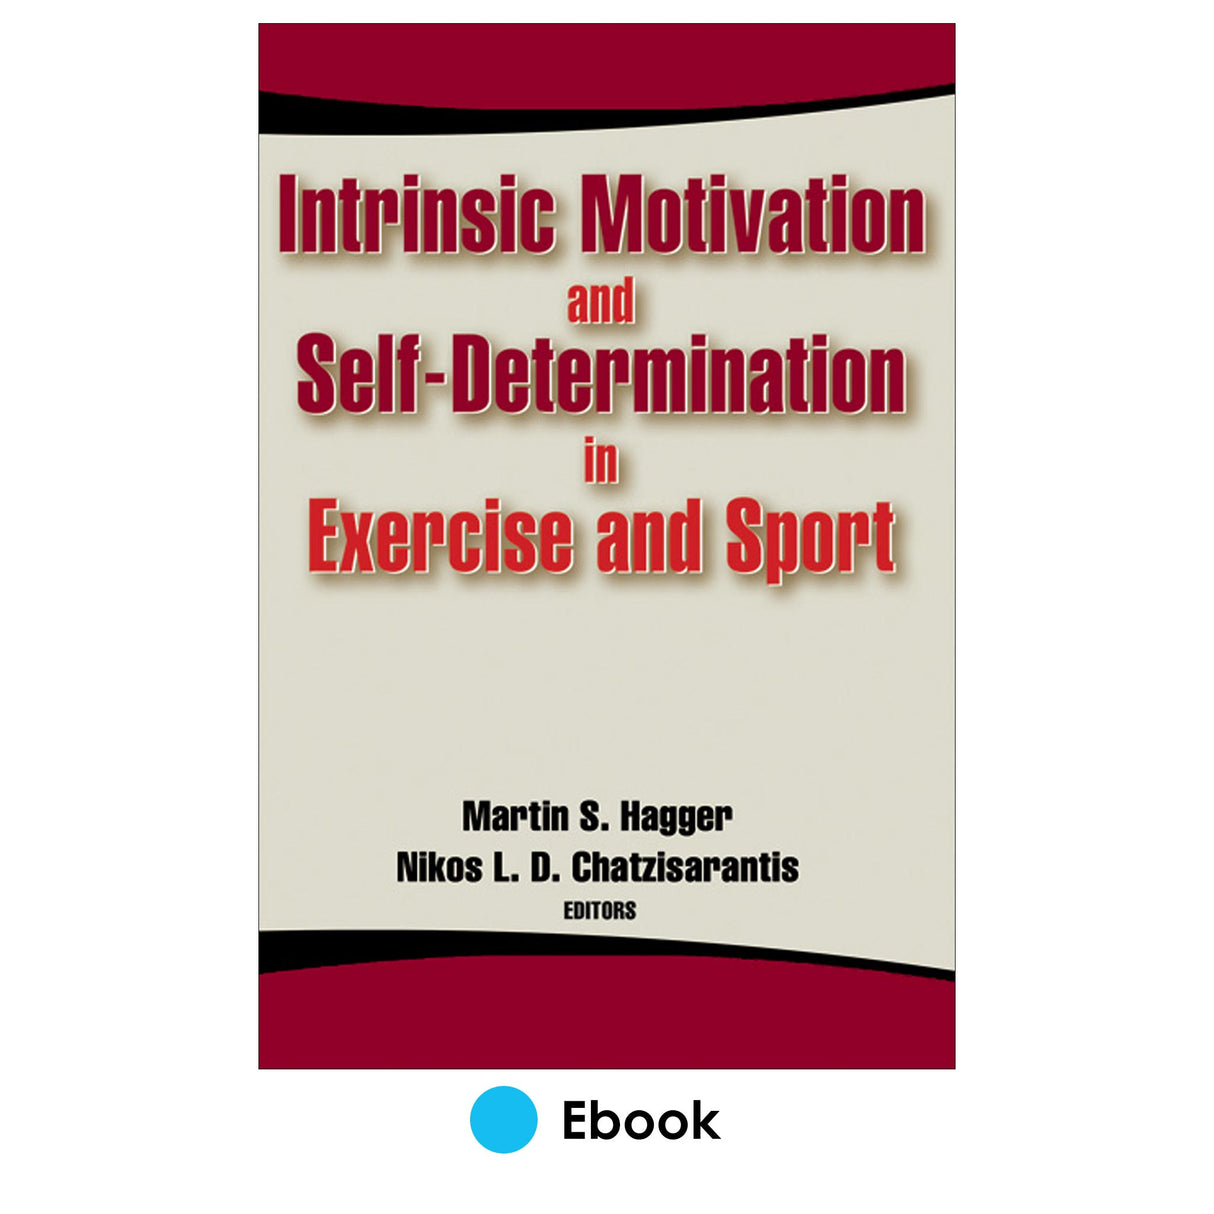 Intrinsic Motivation and Self-Determination in Exercise and Sport PDF